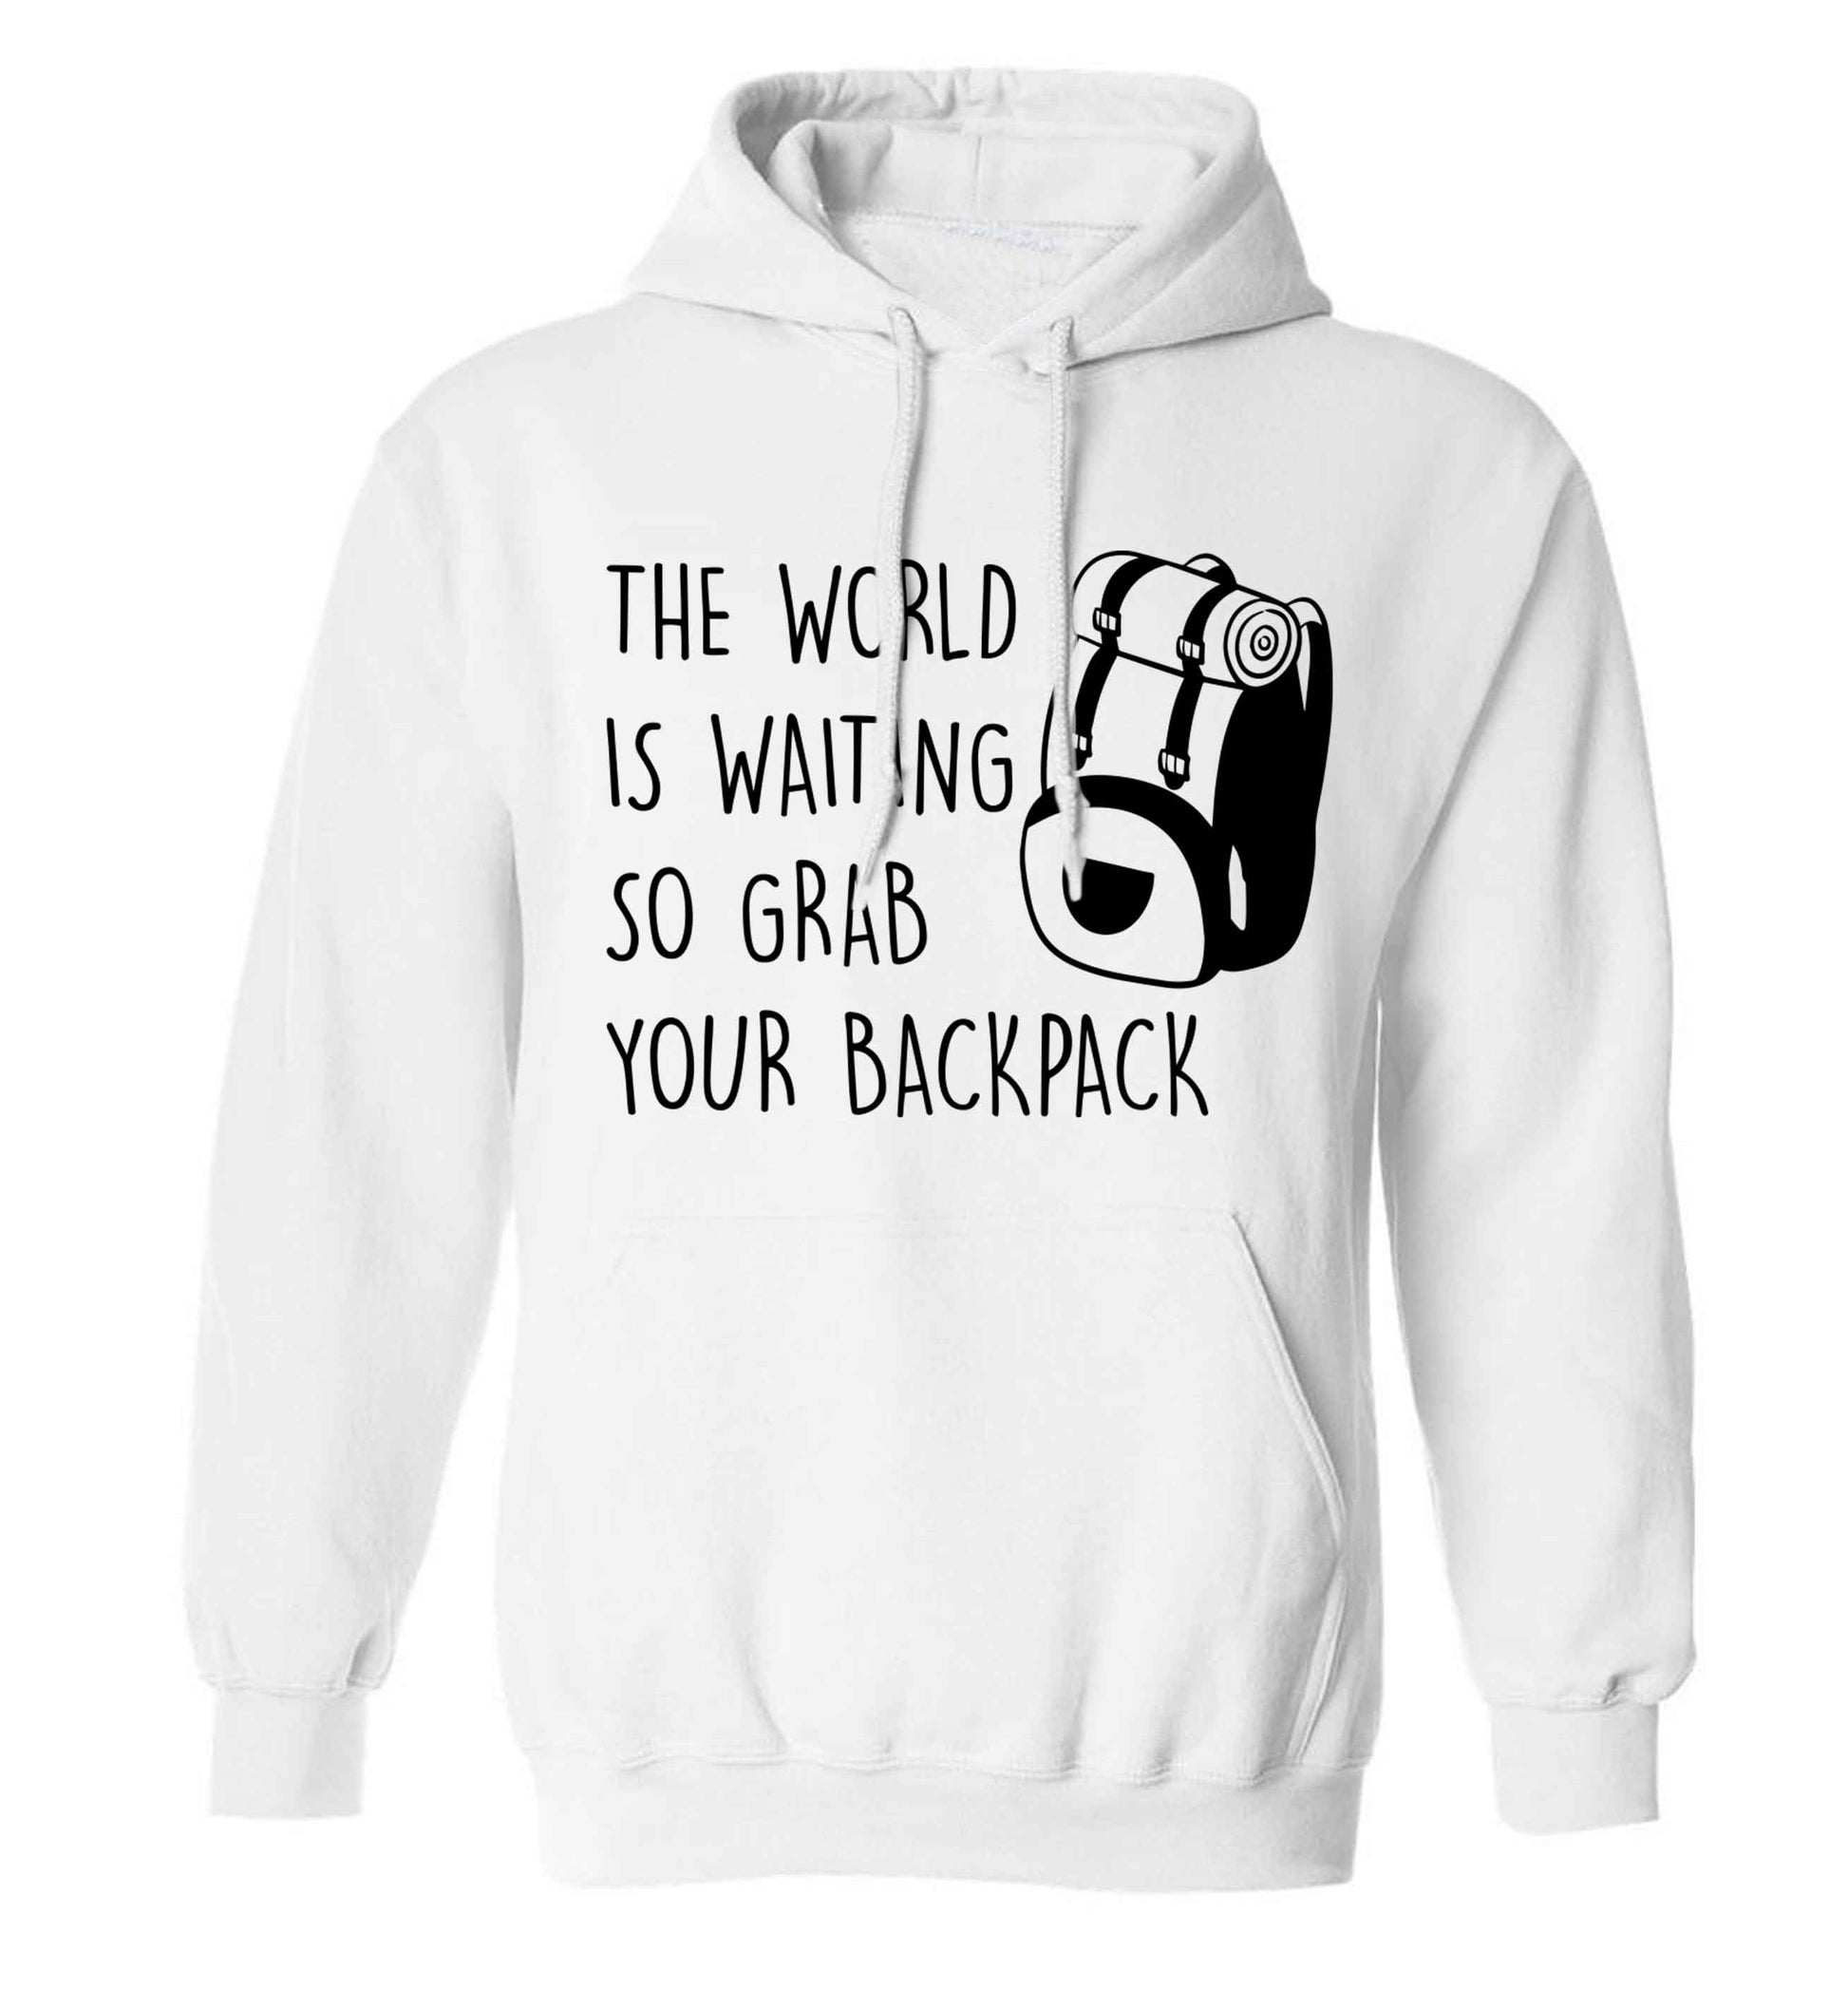 The world is waiting so grab your backpack adults unisex white hoodie 2XL